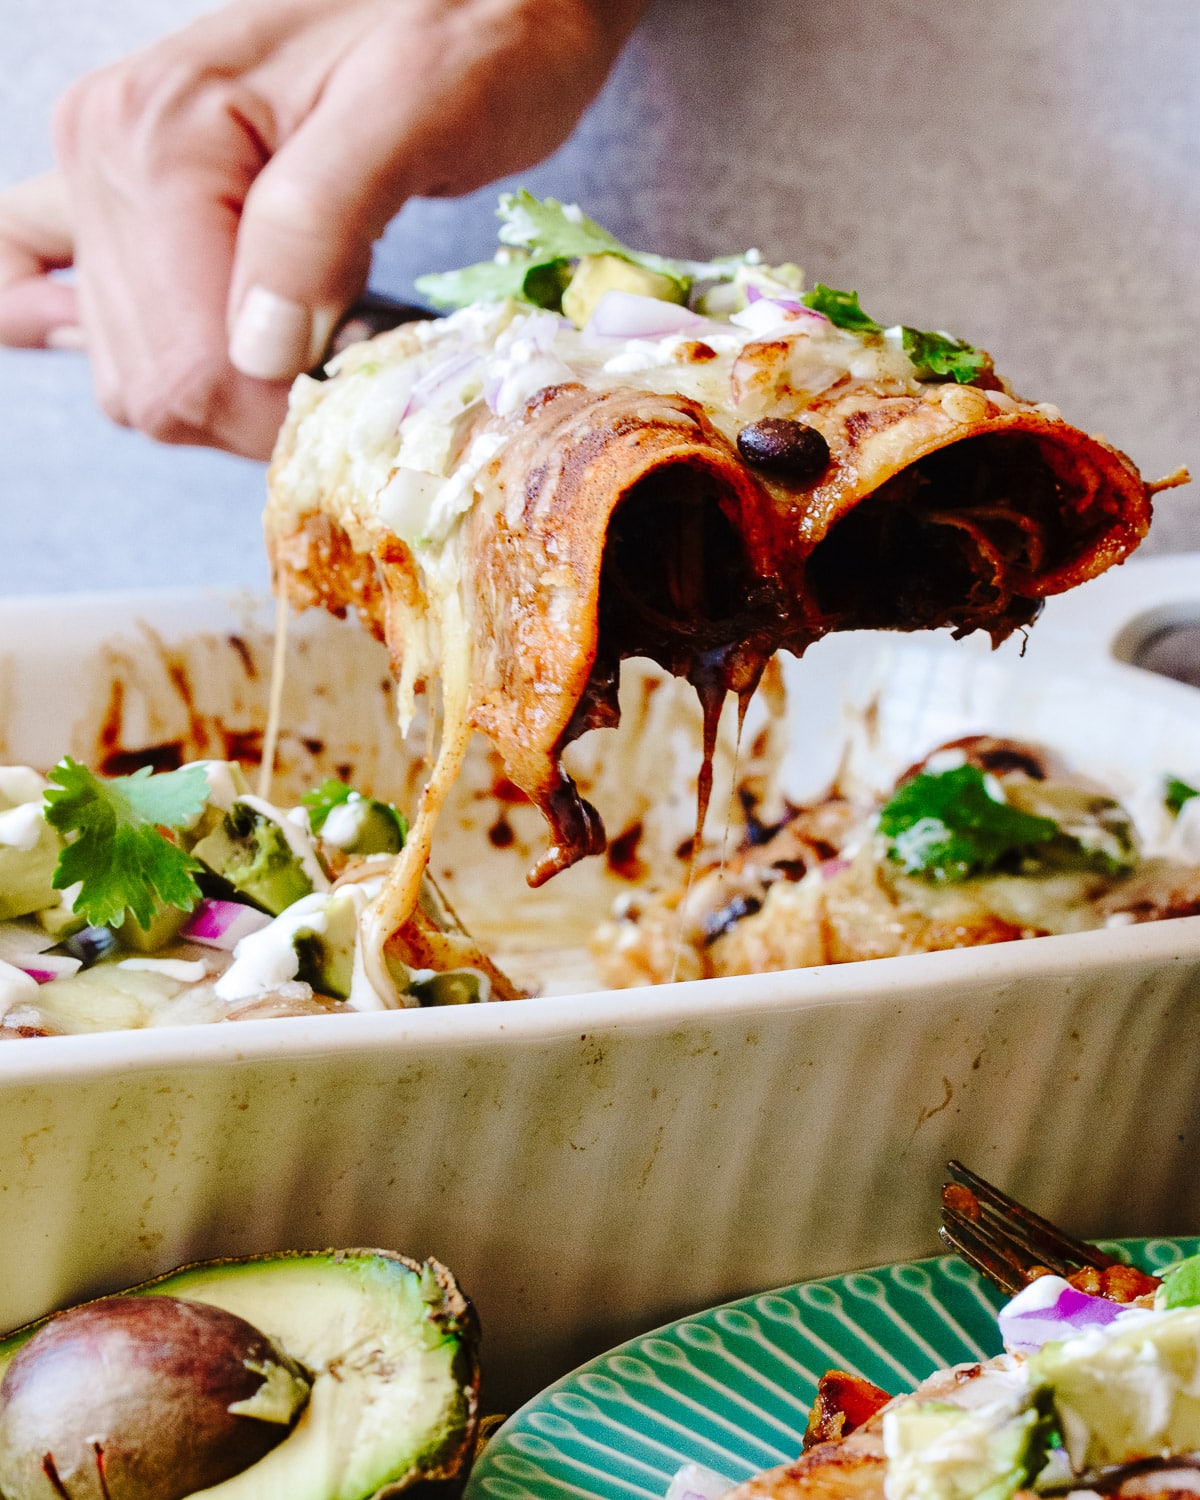 Hand dishing up two enchiladas with toppings.